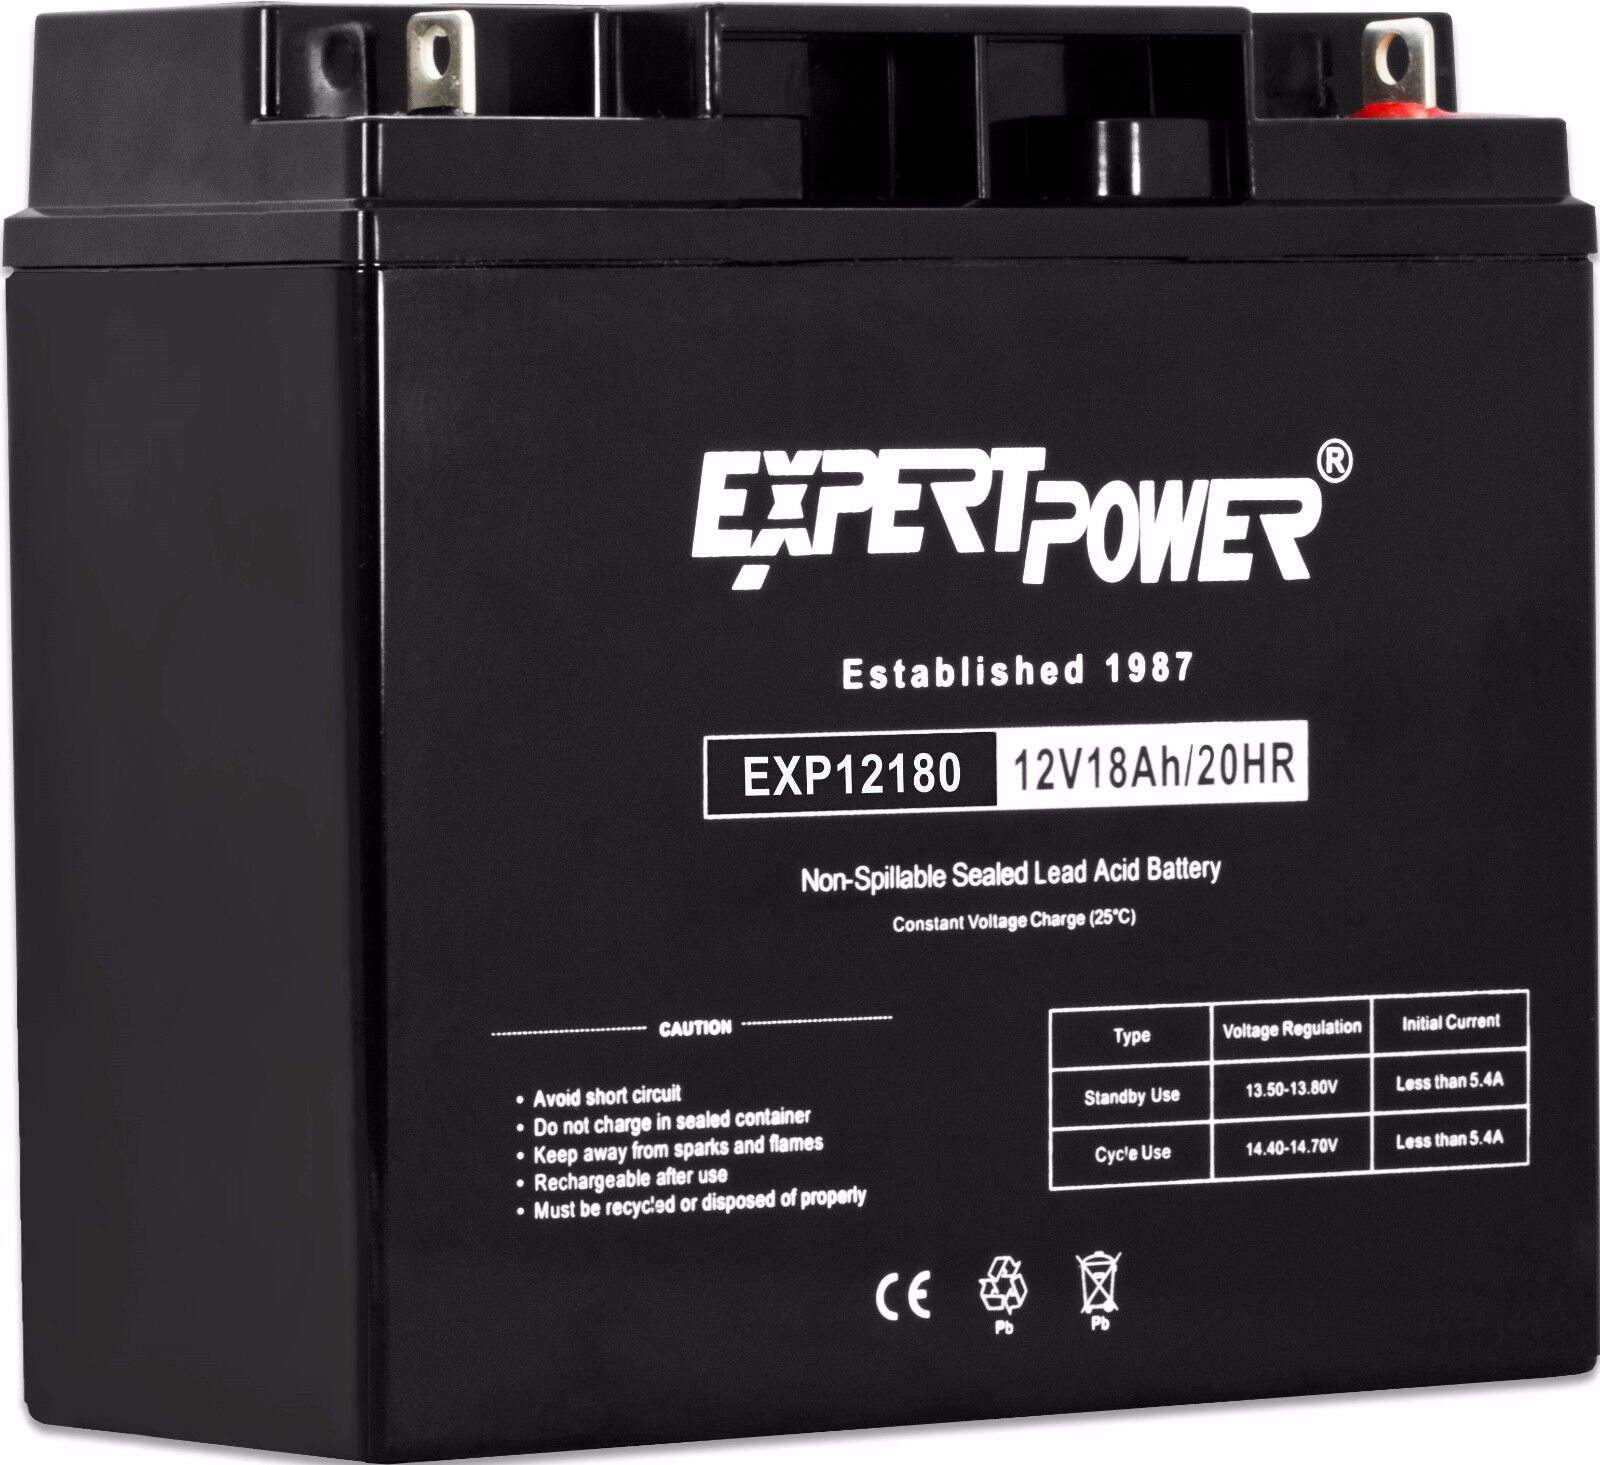 2 EXP12180 12V 18AH Battery for APC SmartUps 1400 1500 [Replacement for UB12180] ExpertPower EXP12180 - фотография #4